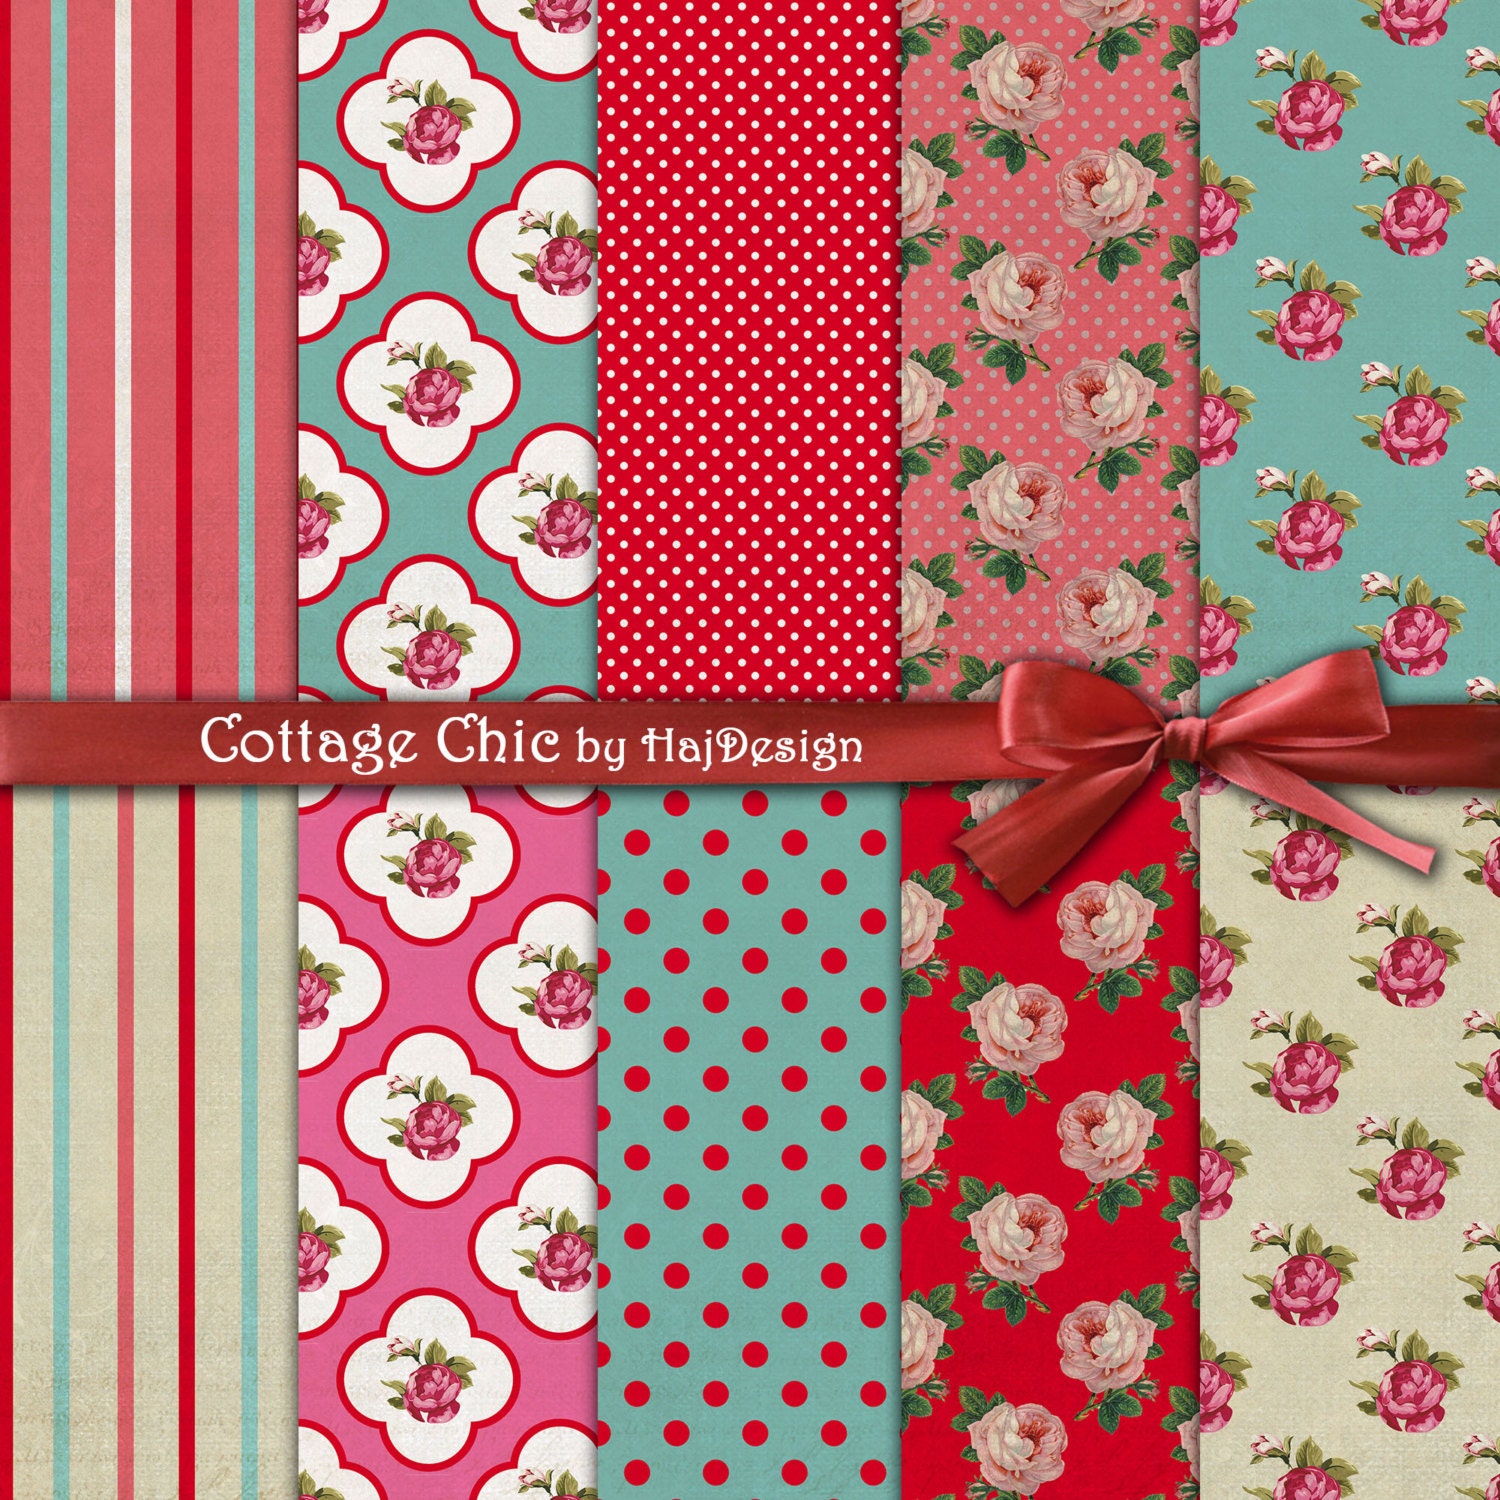 Download Shabby chic digital paper : COTTAGE CHIC floral